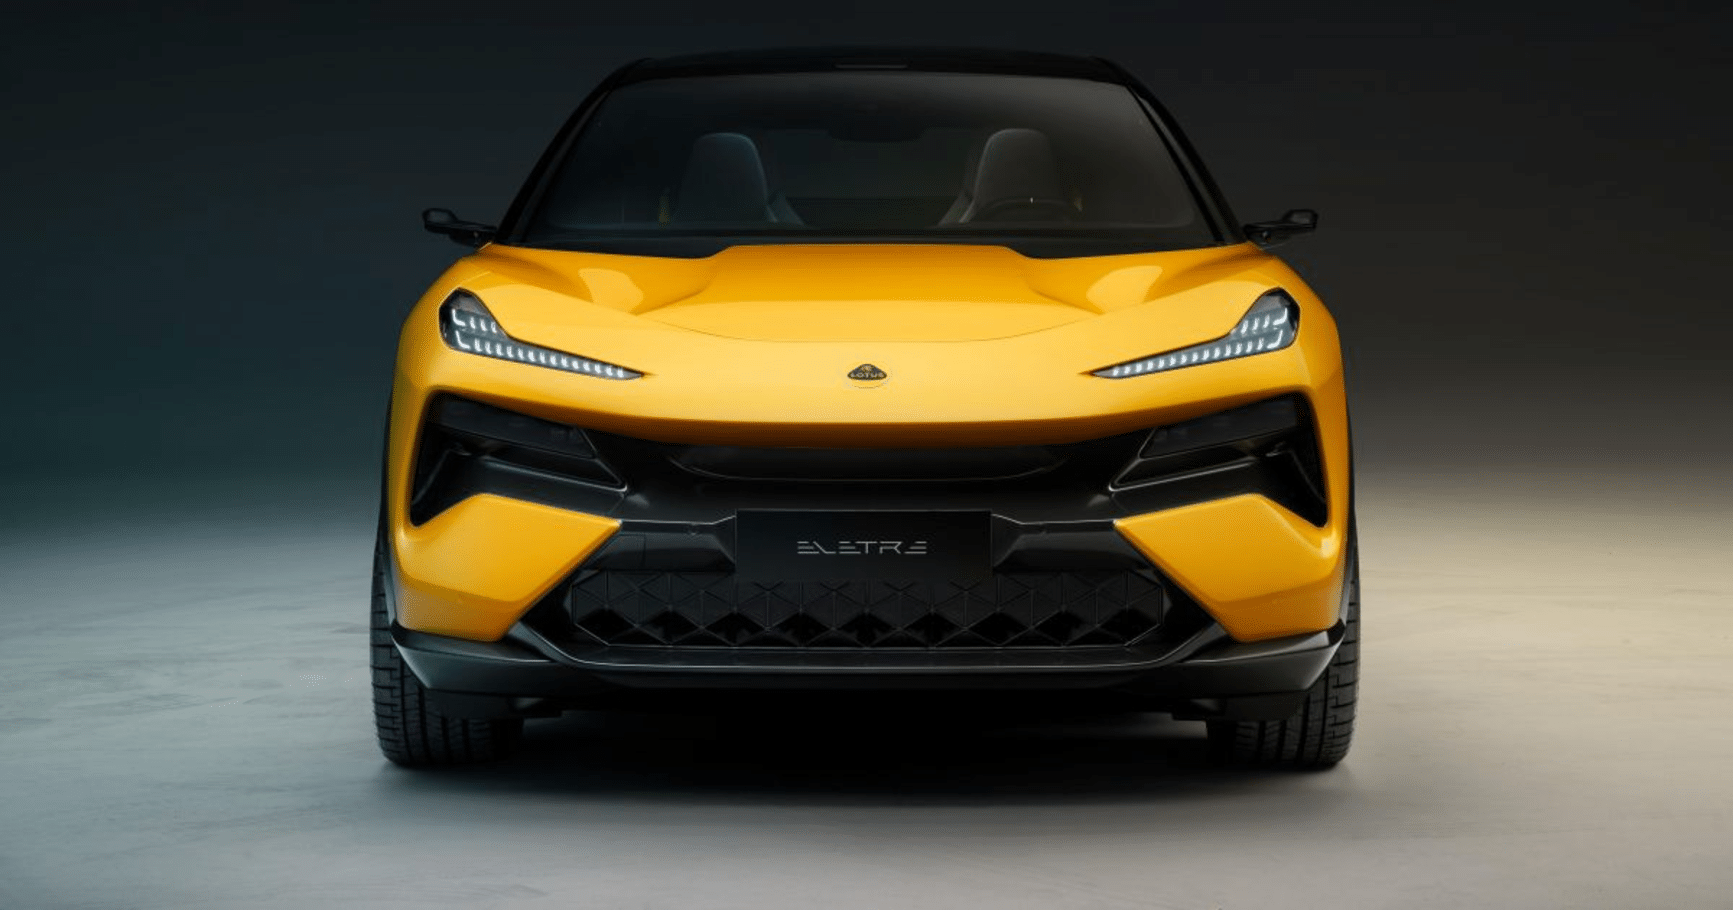 Lotus Enters the Electric Car Market in Australia with the New Eletre